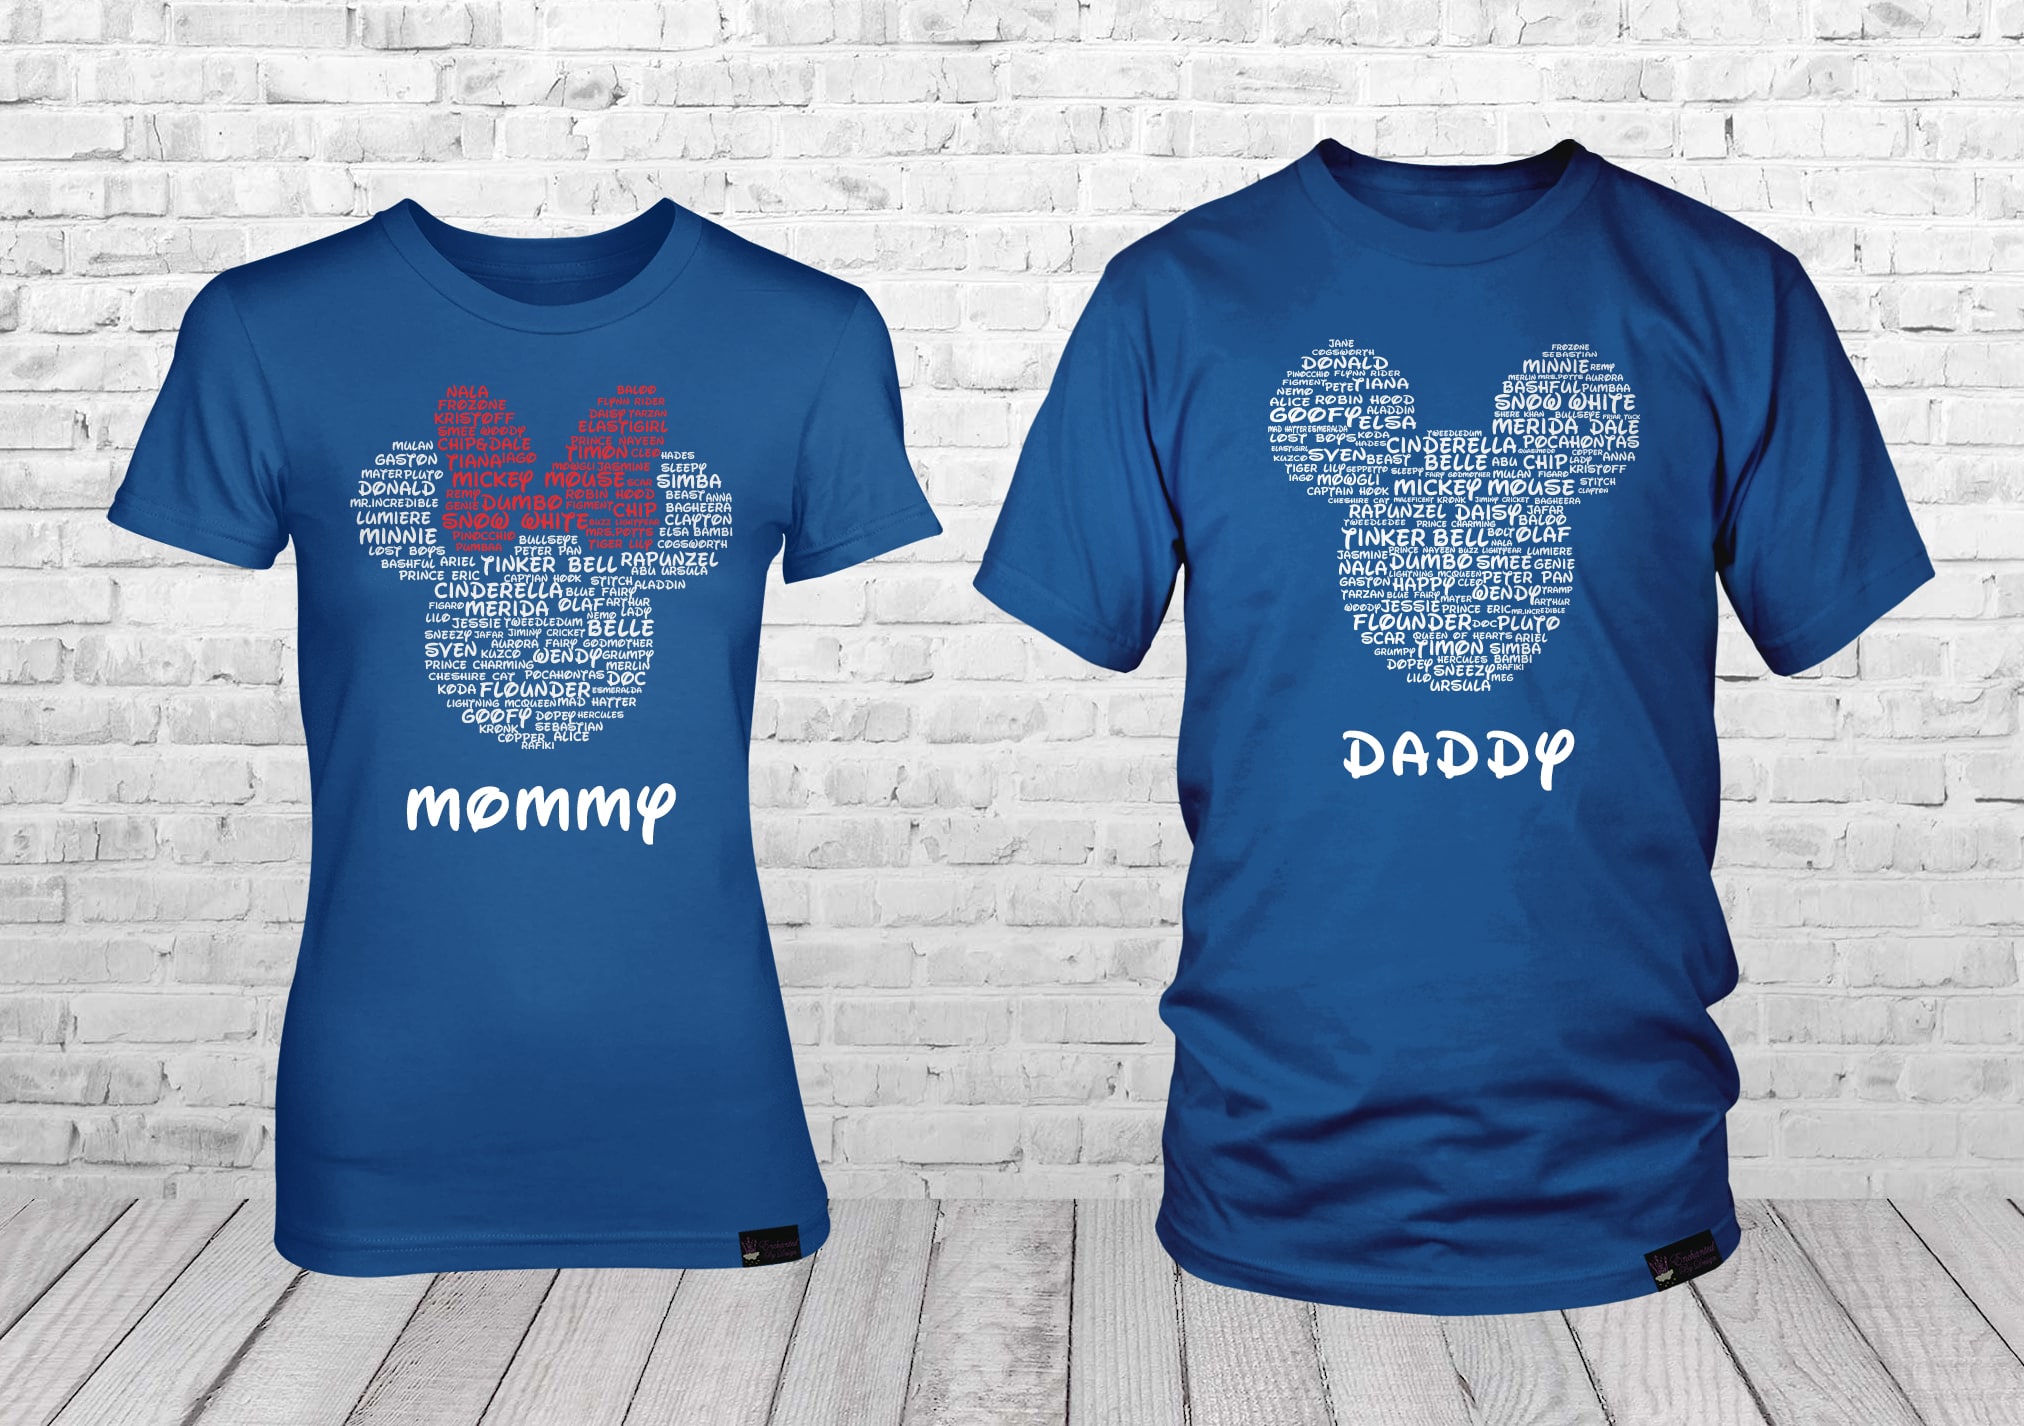 Matching Disney World Family Vacation Shirts Featuring Mickey and Minnie Head Ears Can Be 